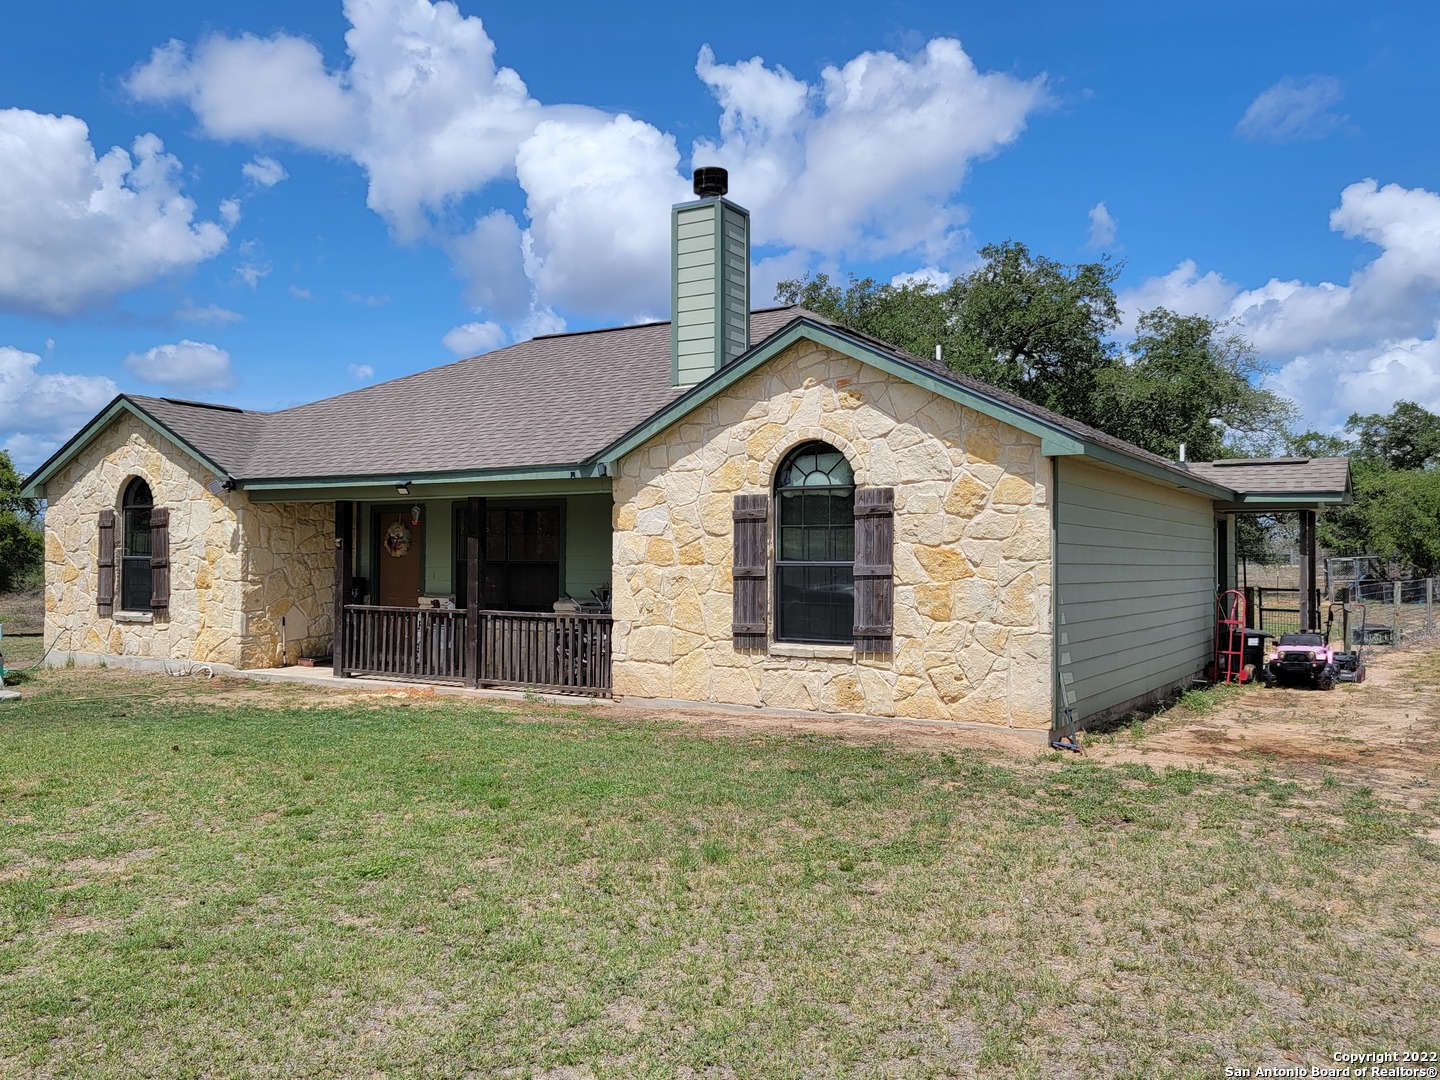 Come to Poteet!  This precious country home has lots of room to help grow your family!  4.46 acres, with mature trees.  Gate opens the entrance as you drive into your new home place!  Call for details on this secluded, ready to move-in 3 bedroom 2 bath custom home on 4.46 acres.